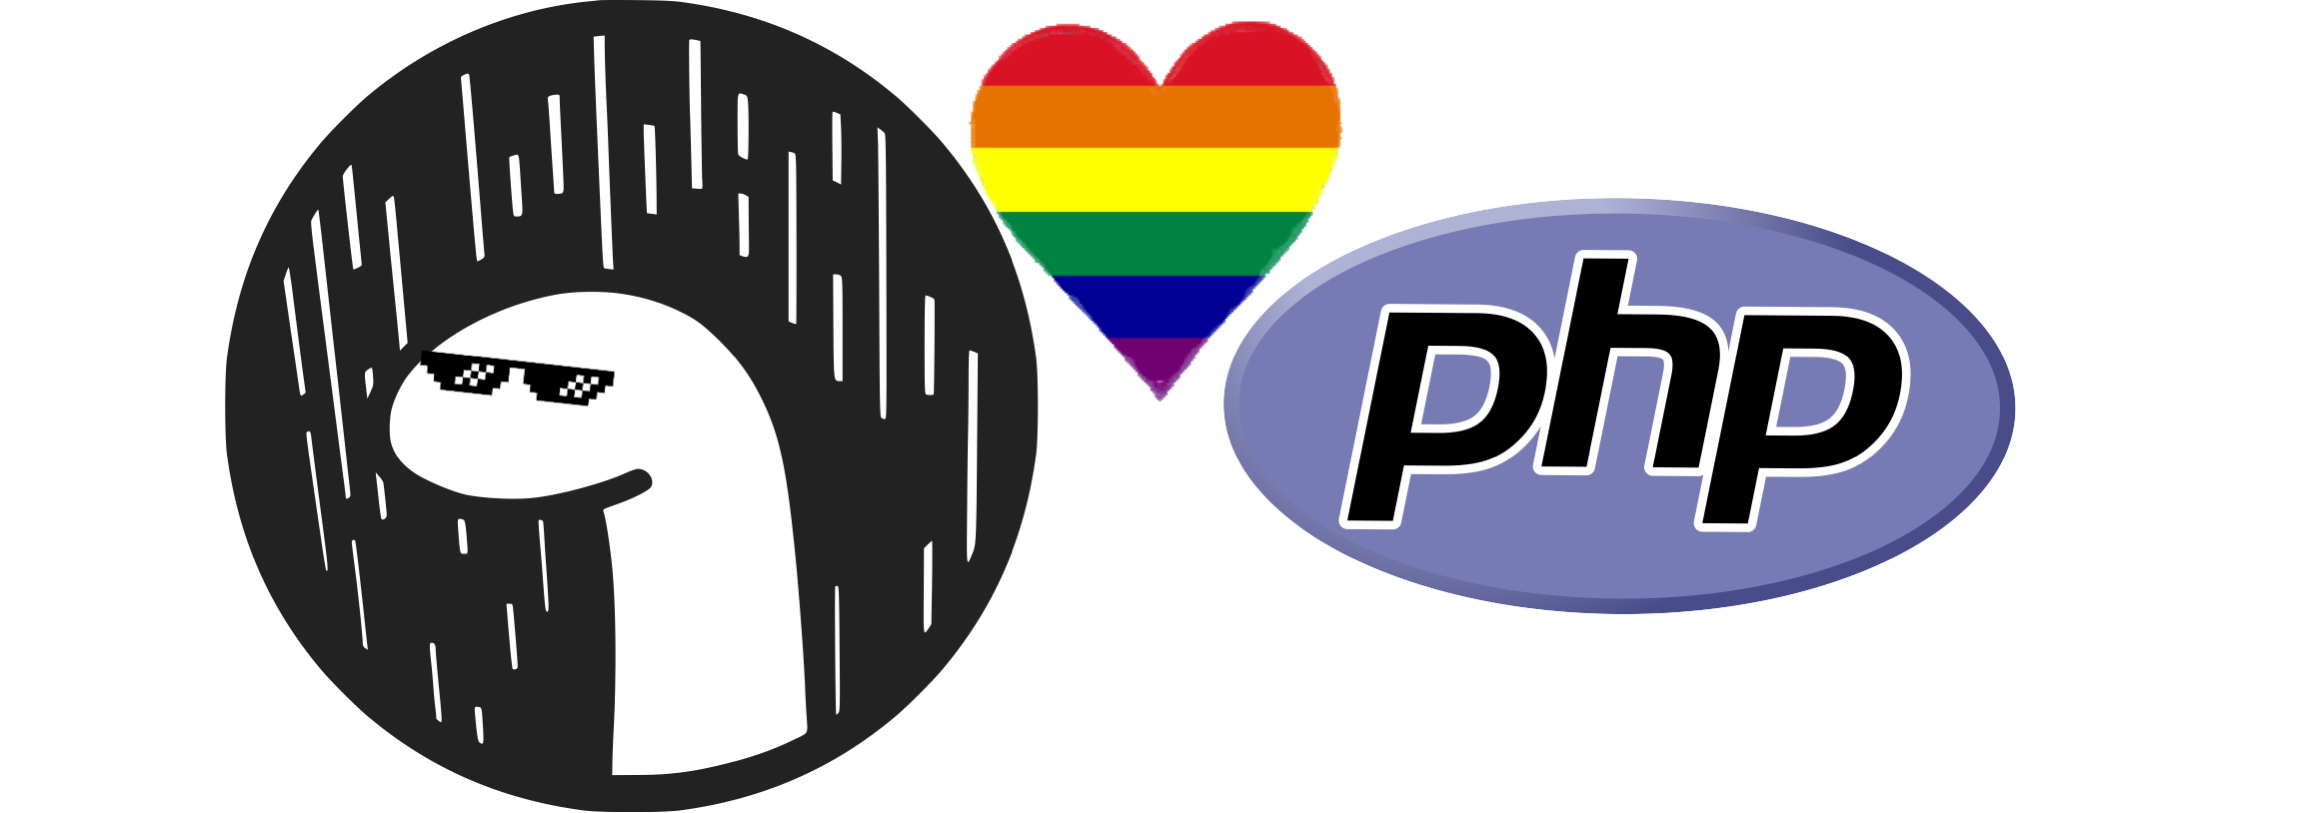 Deno logo next to the PHP logo with a rainbow heart in between